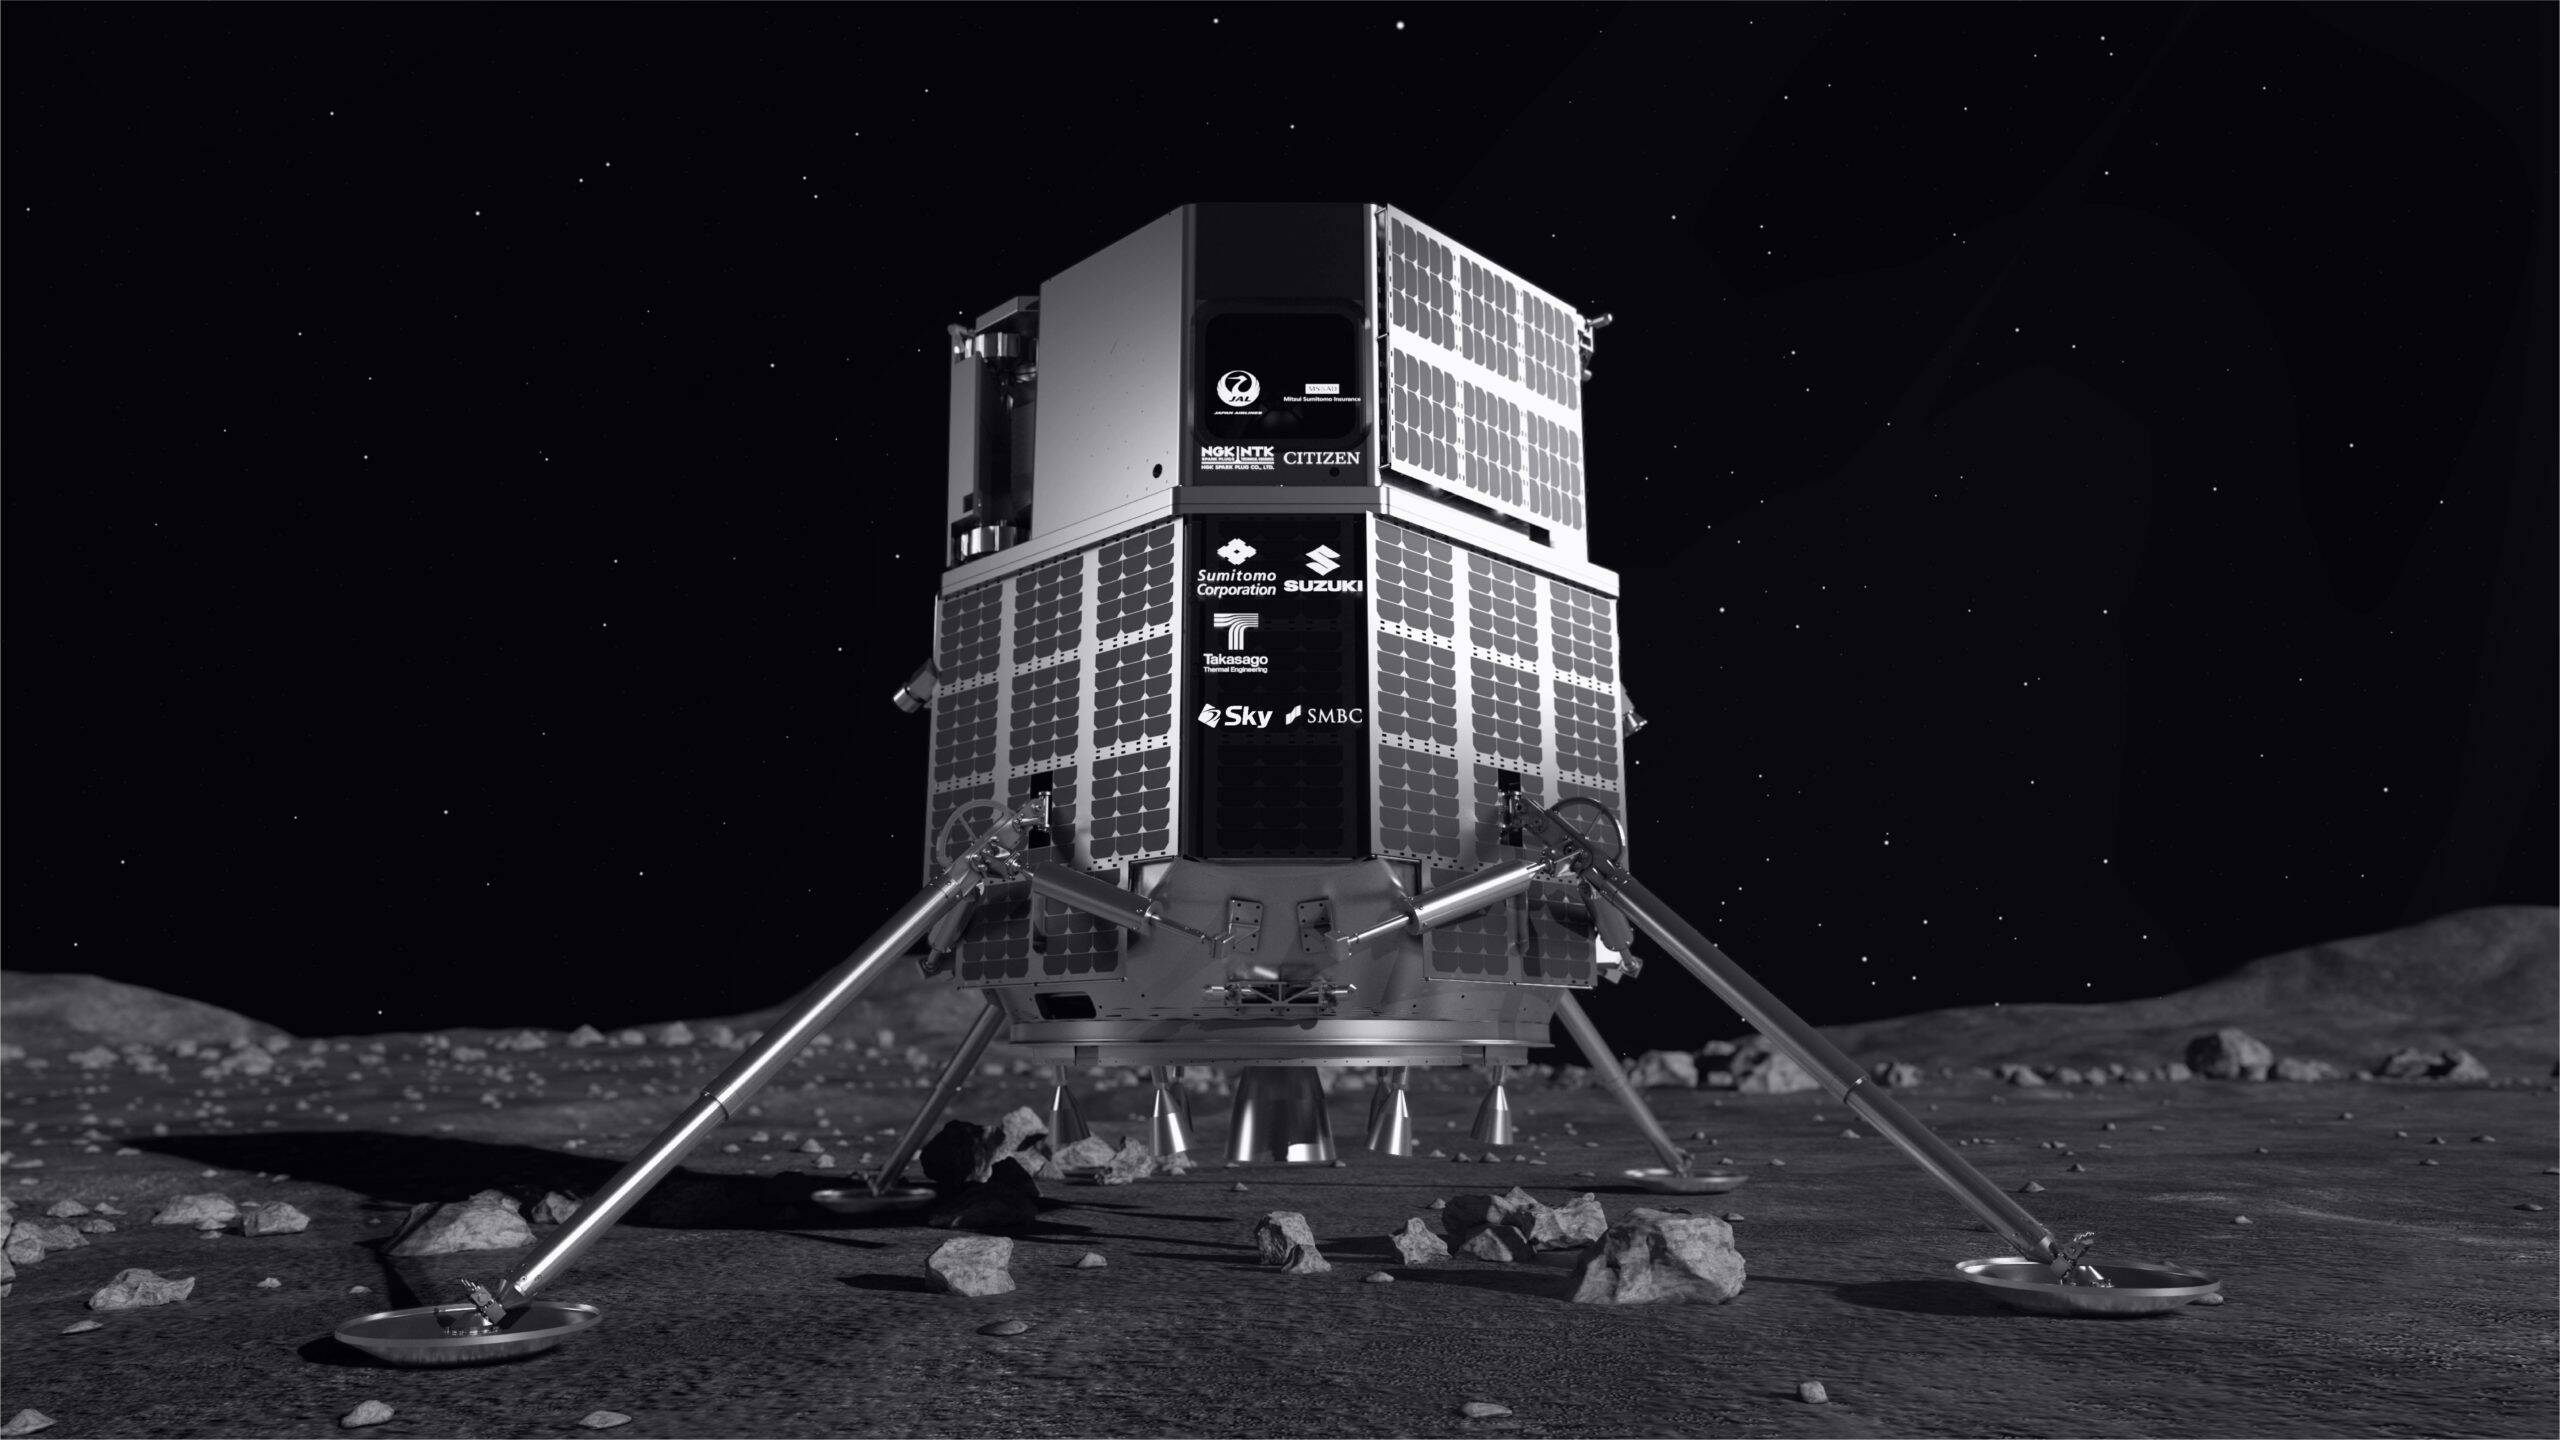 Japanese company's private Moon mission enters Lunar orbit - The Register